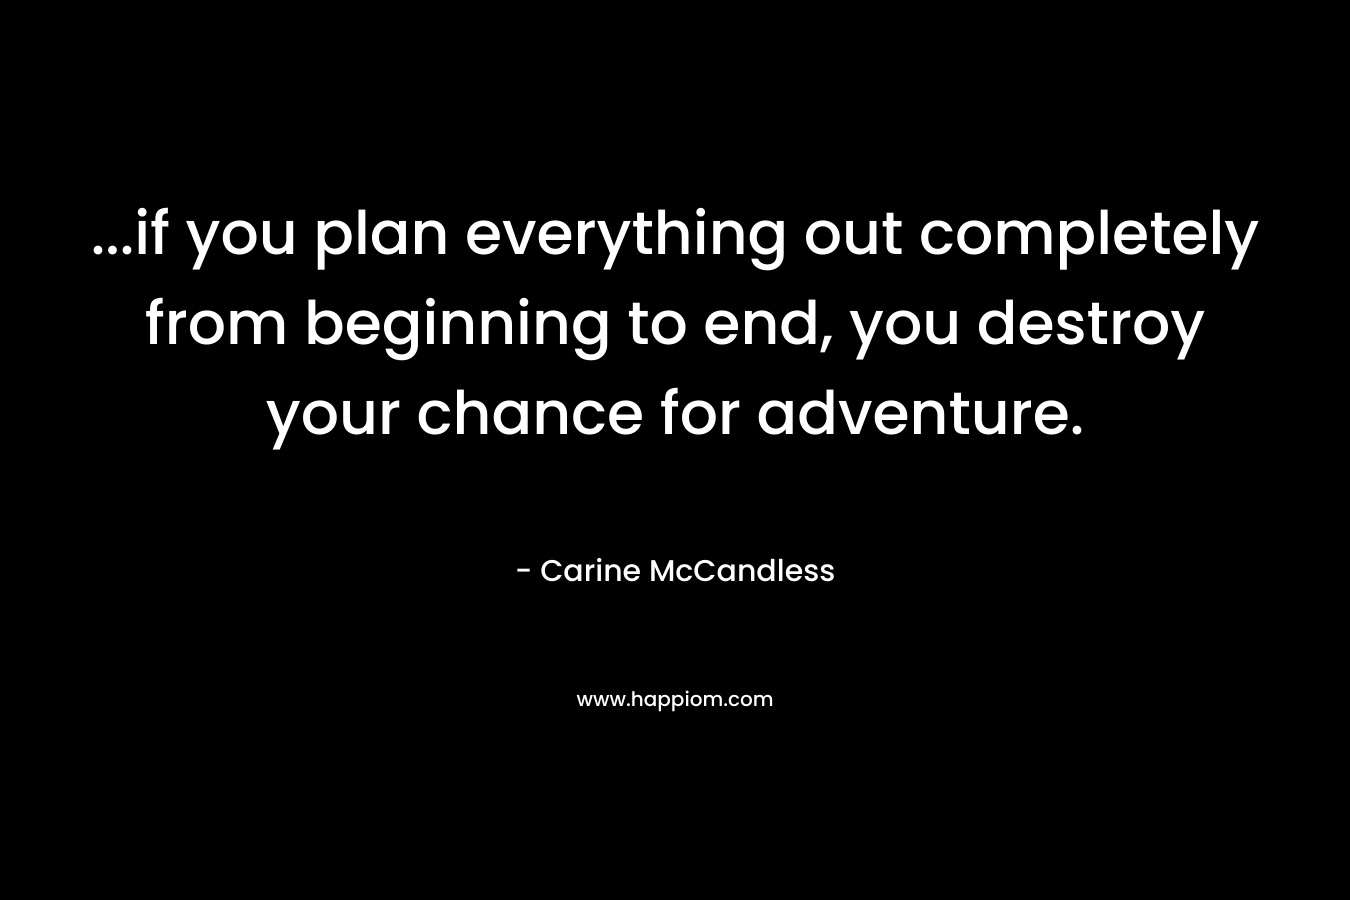 ...if you plan everything out completely from beginning to end, you destroy your chance for adventure.